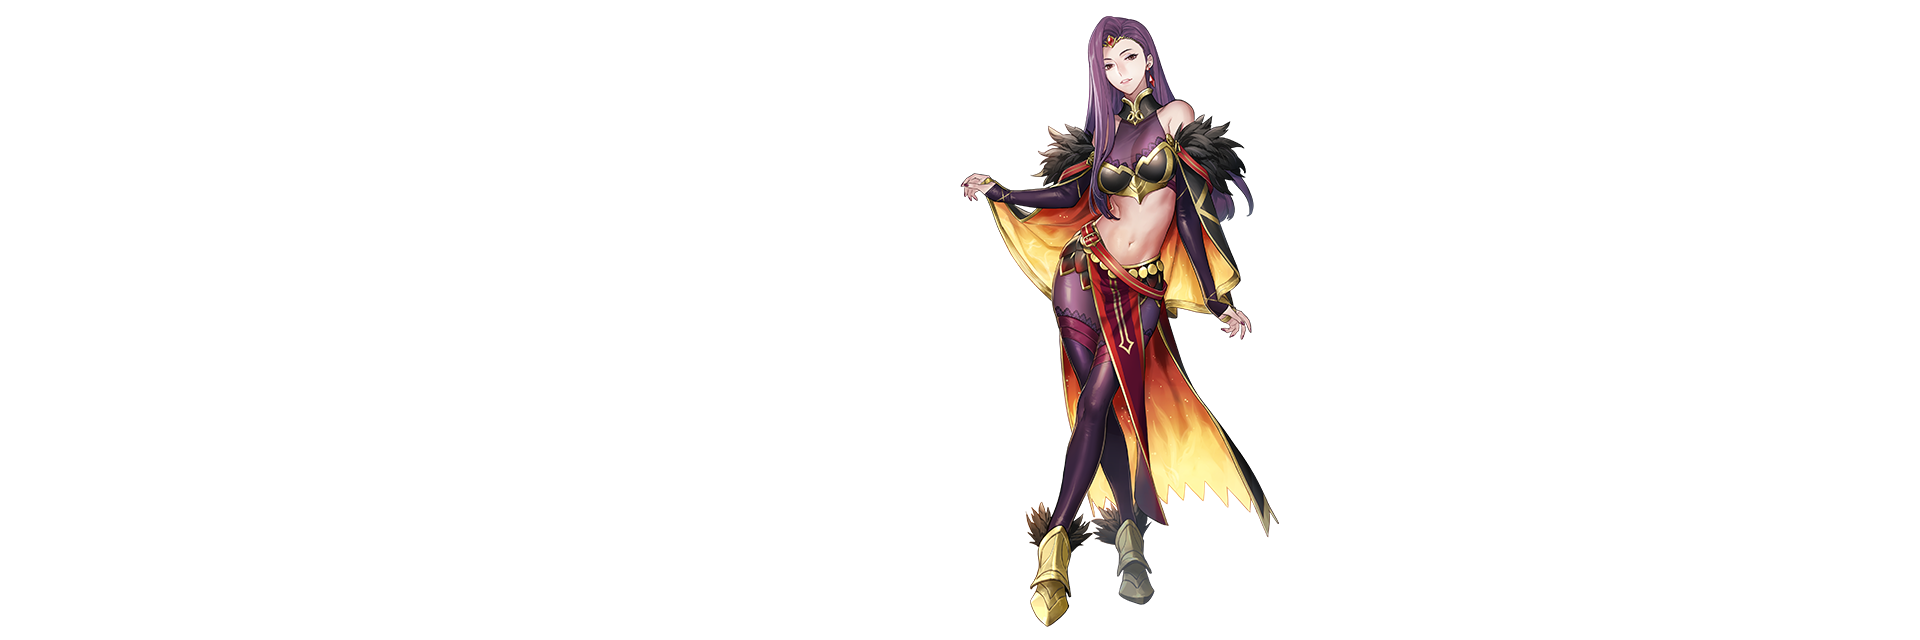 Mage implacable Sonya